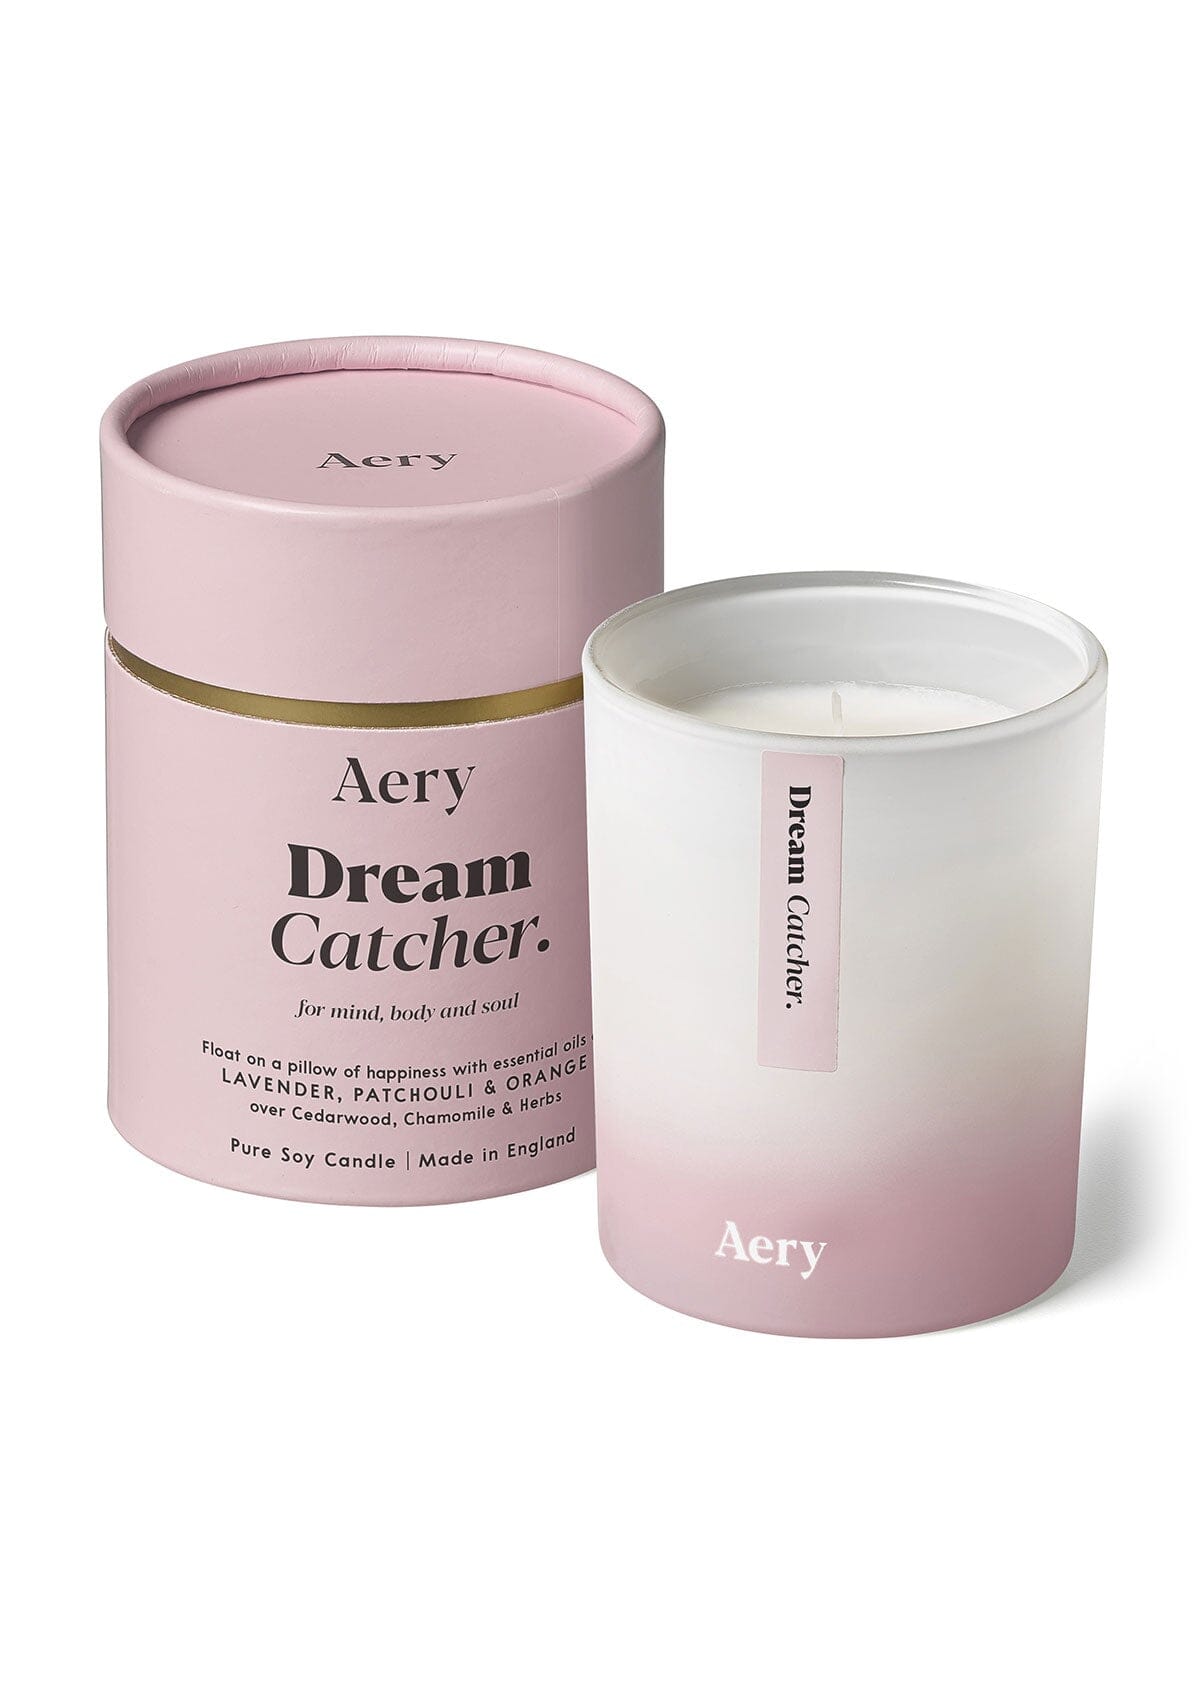 Lilac Dream Catcher candle by Aery displayed next to product packaging on white background 